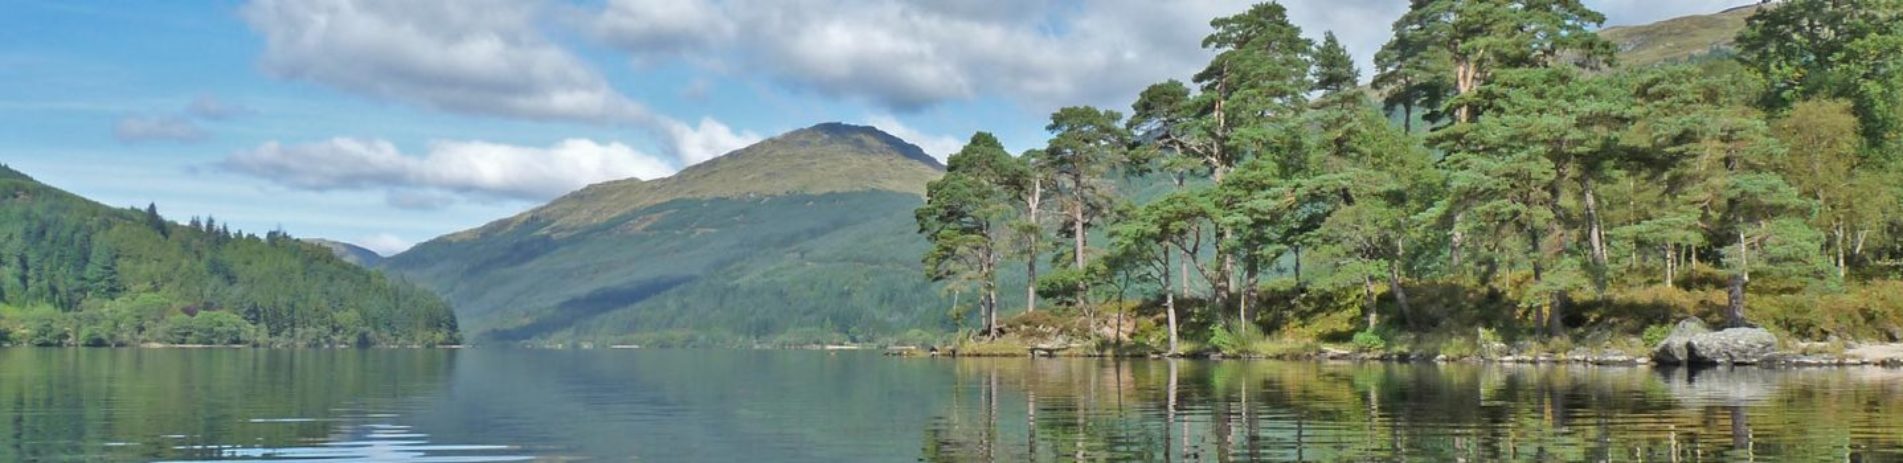 loch-eck-with-stunning-forests-on-hills-surrounding-it-and-prominent-patch-of-scots-pines-on-right-by-the-shore